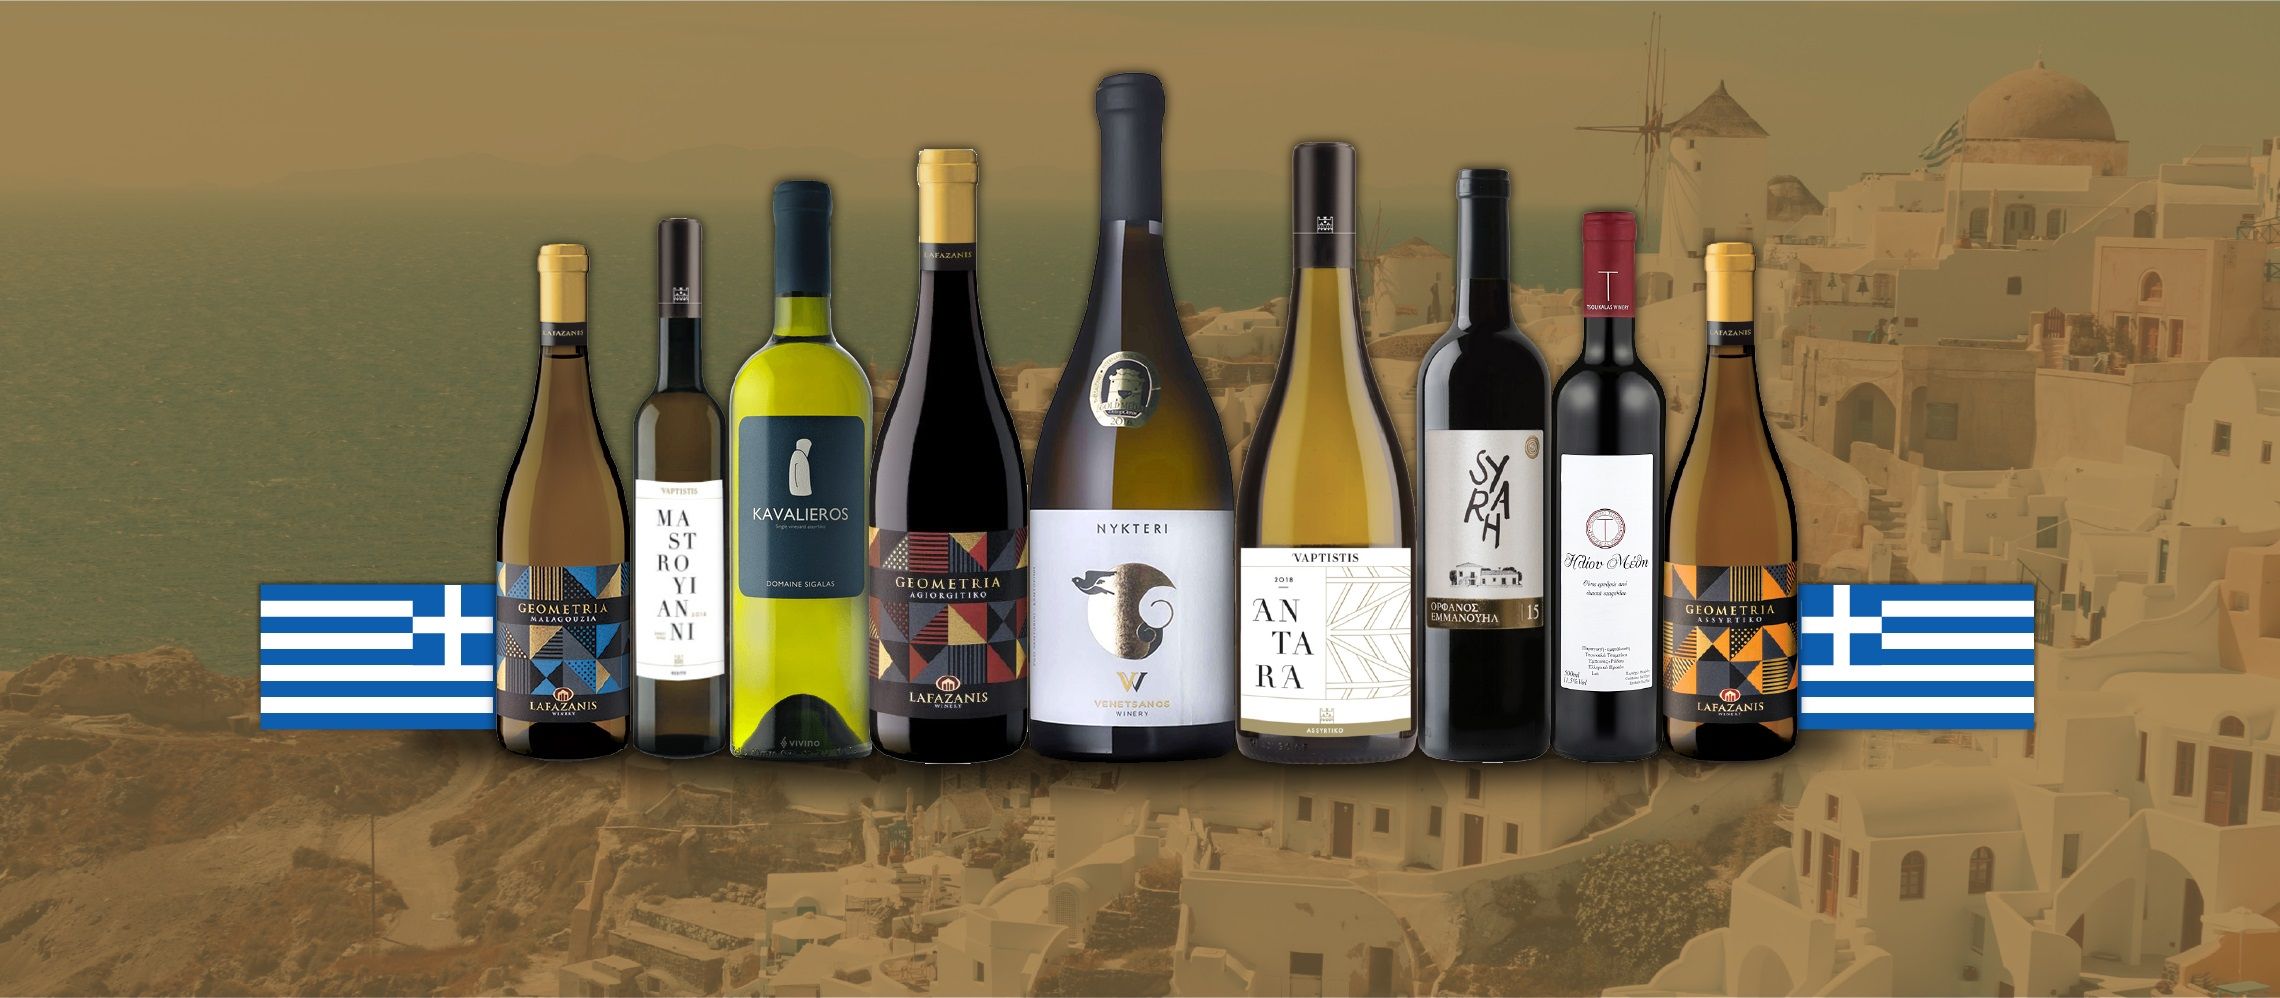 Photo for: 12 Must-Try Wines From The Lands Of Dionysus